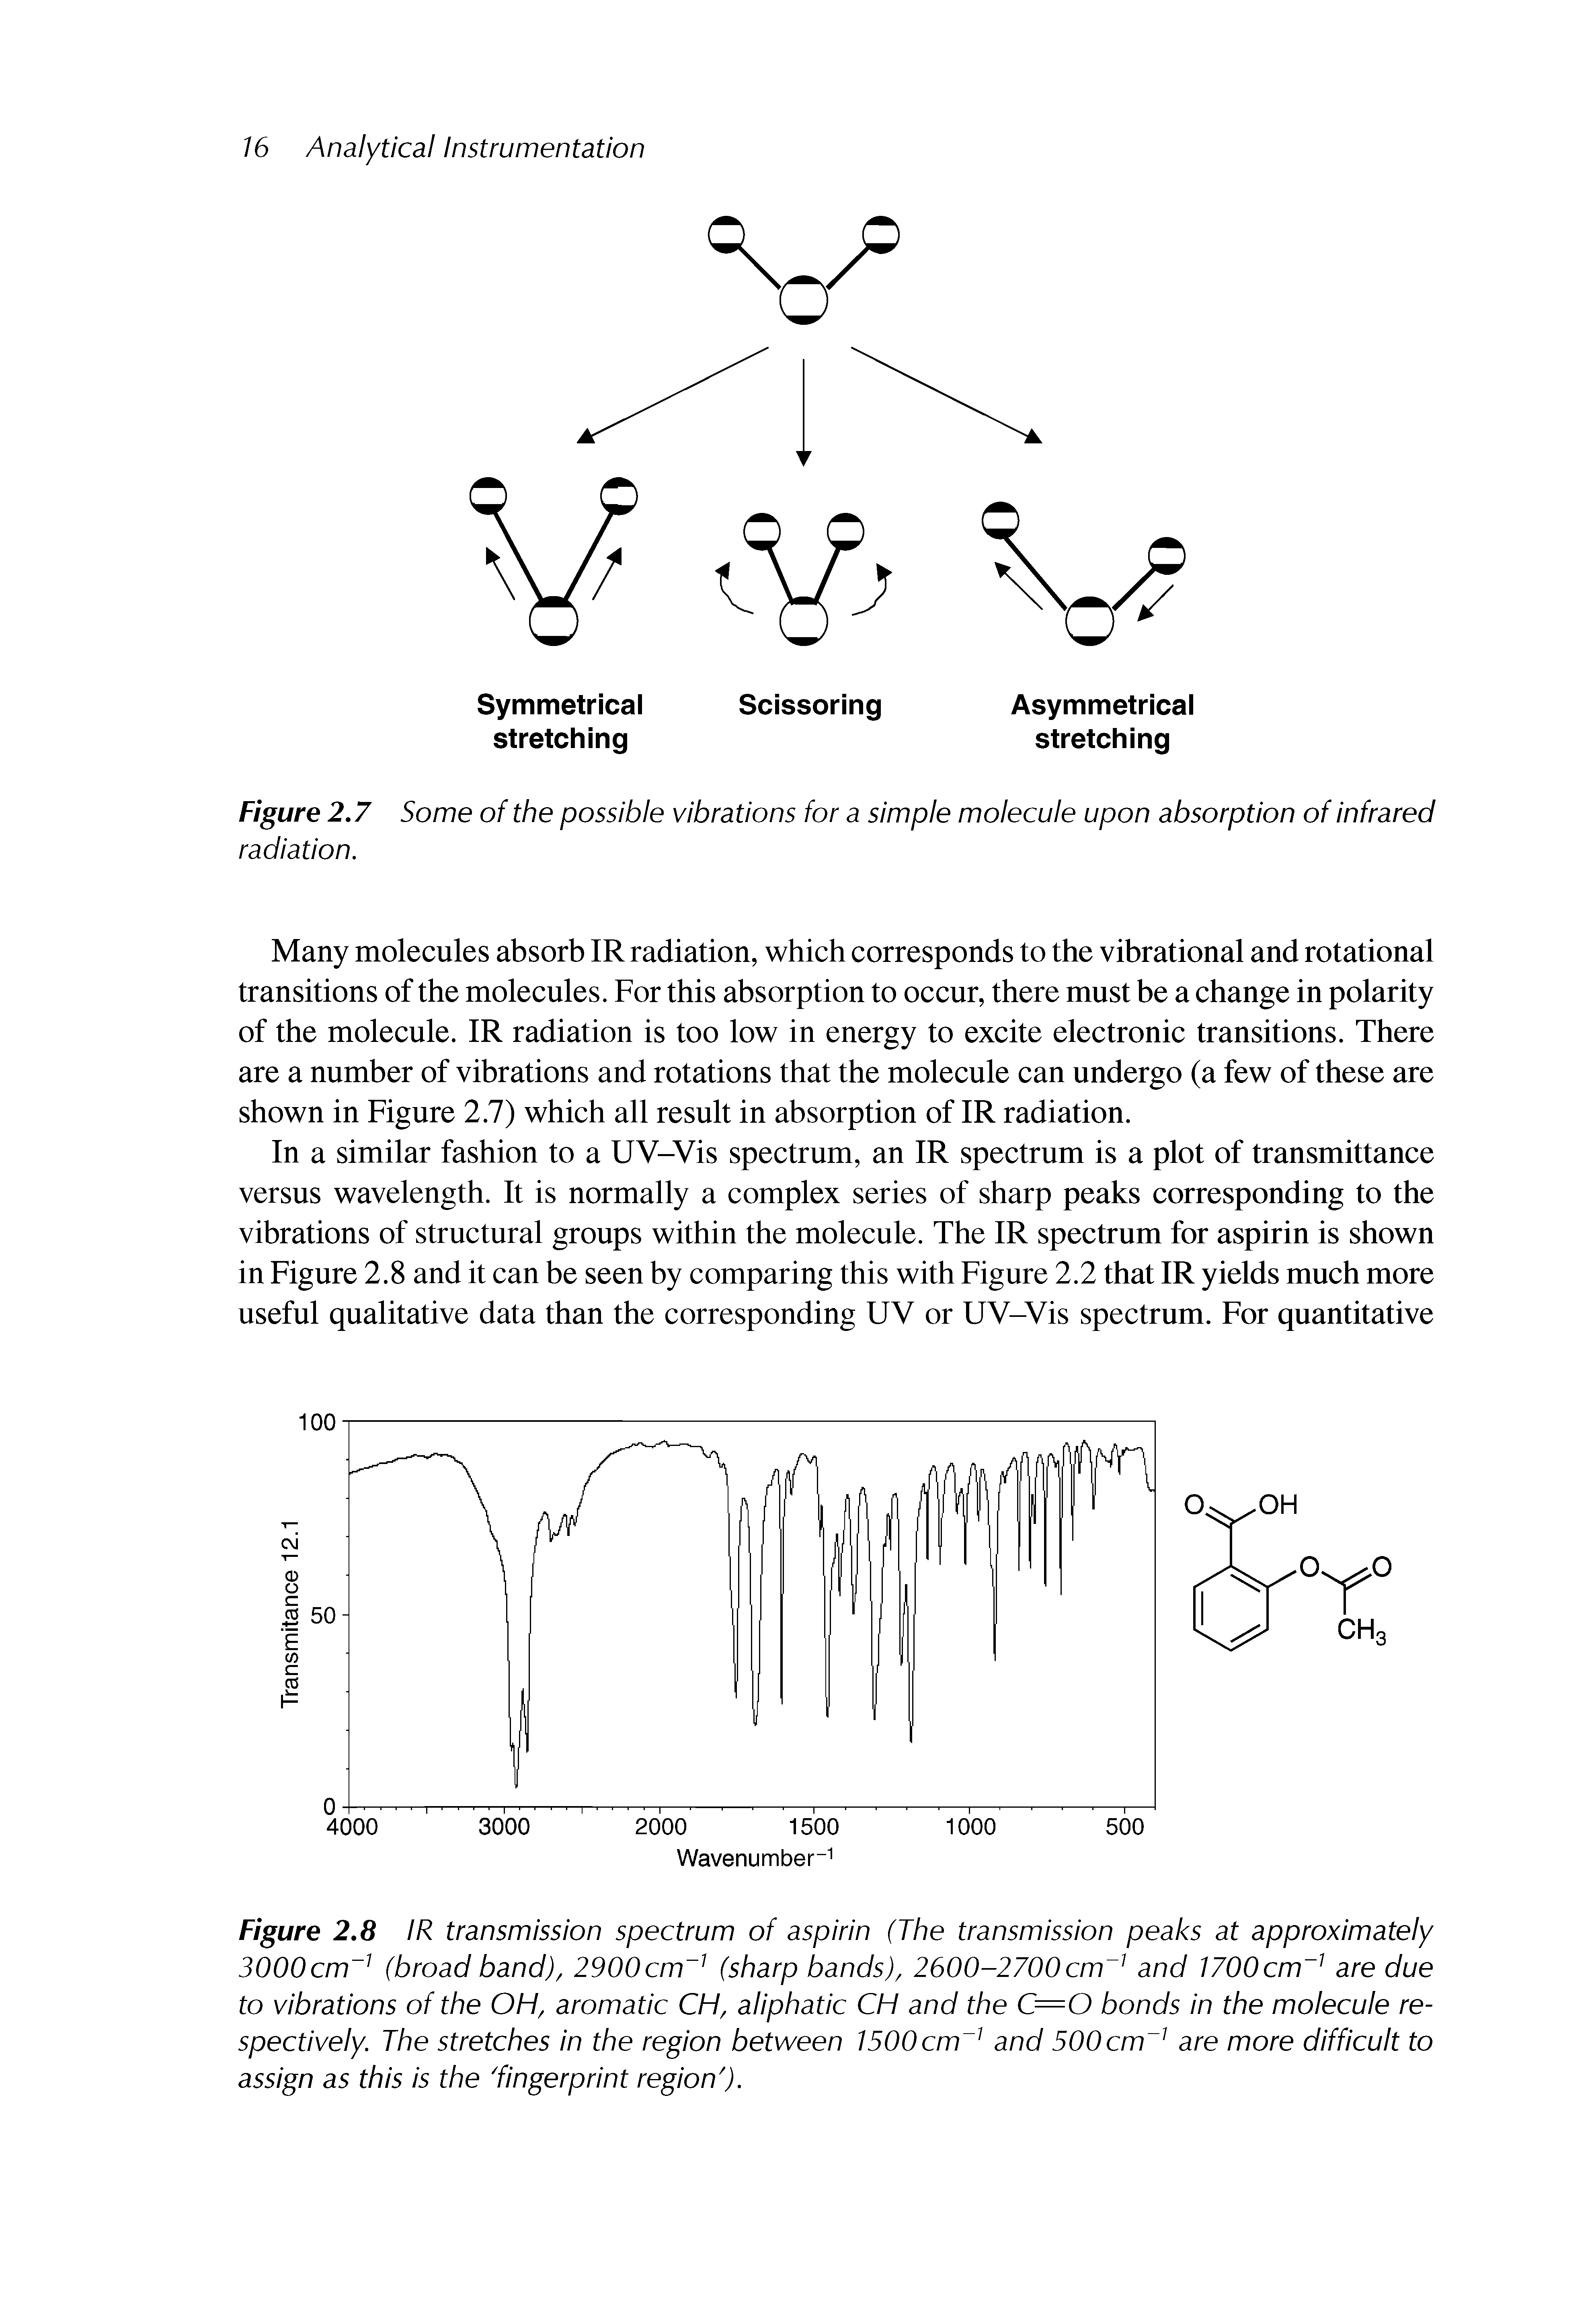 Figure 2,7 Some of the possible vibrations for a simple molecule upon absorption of infrared radiation.